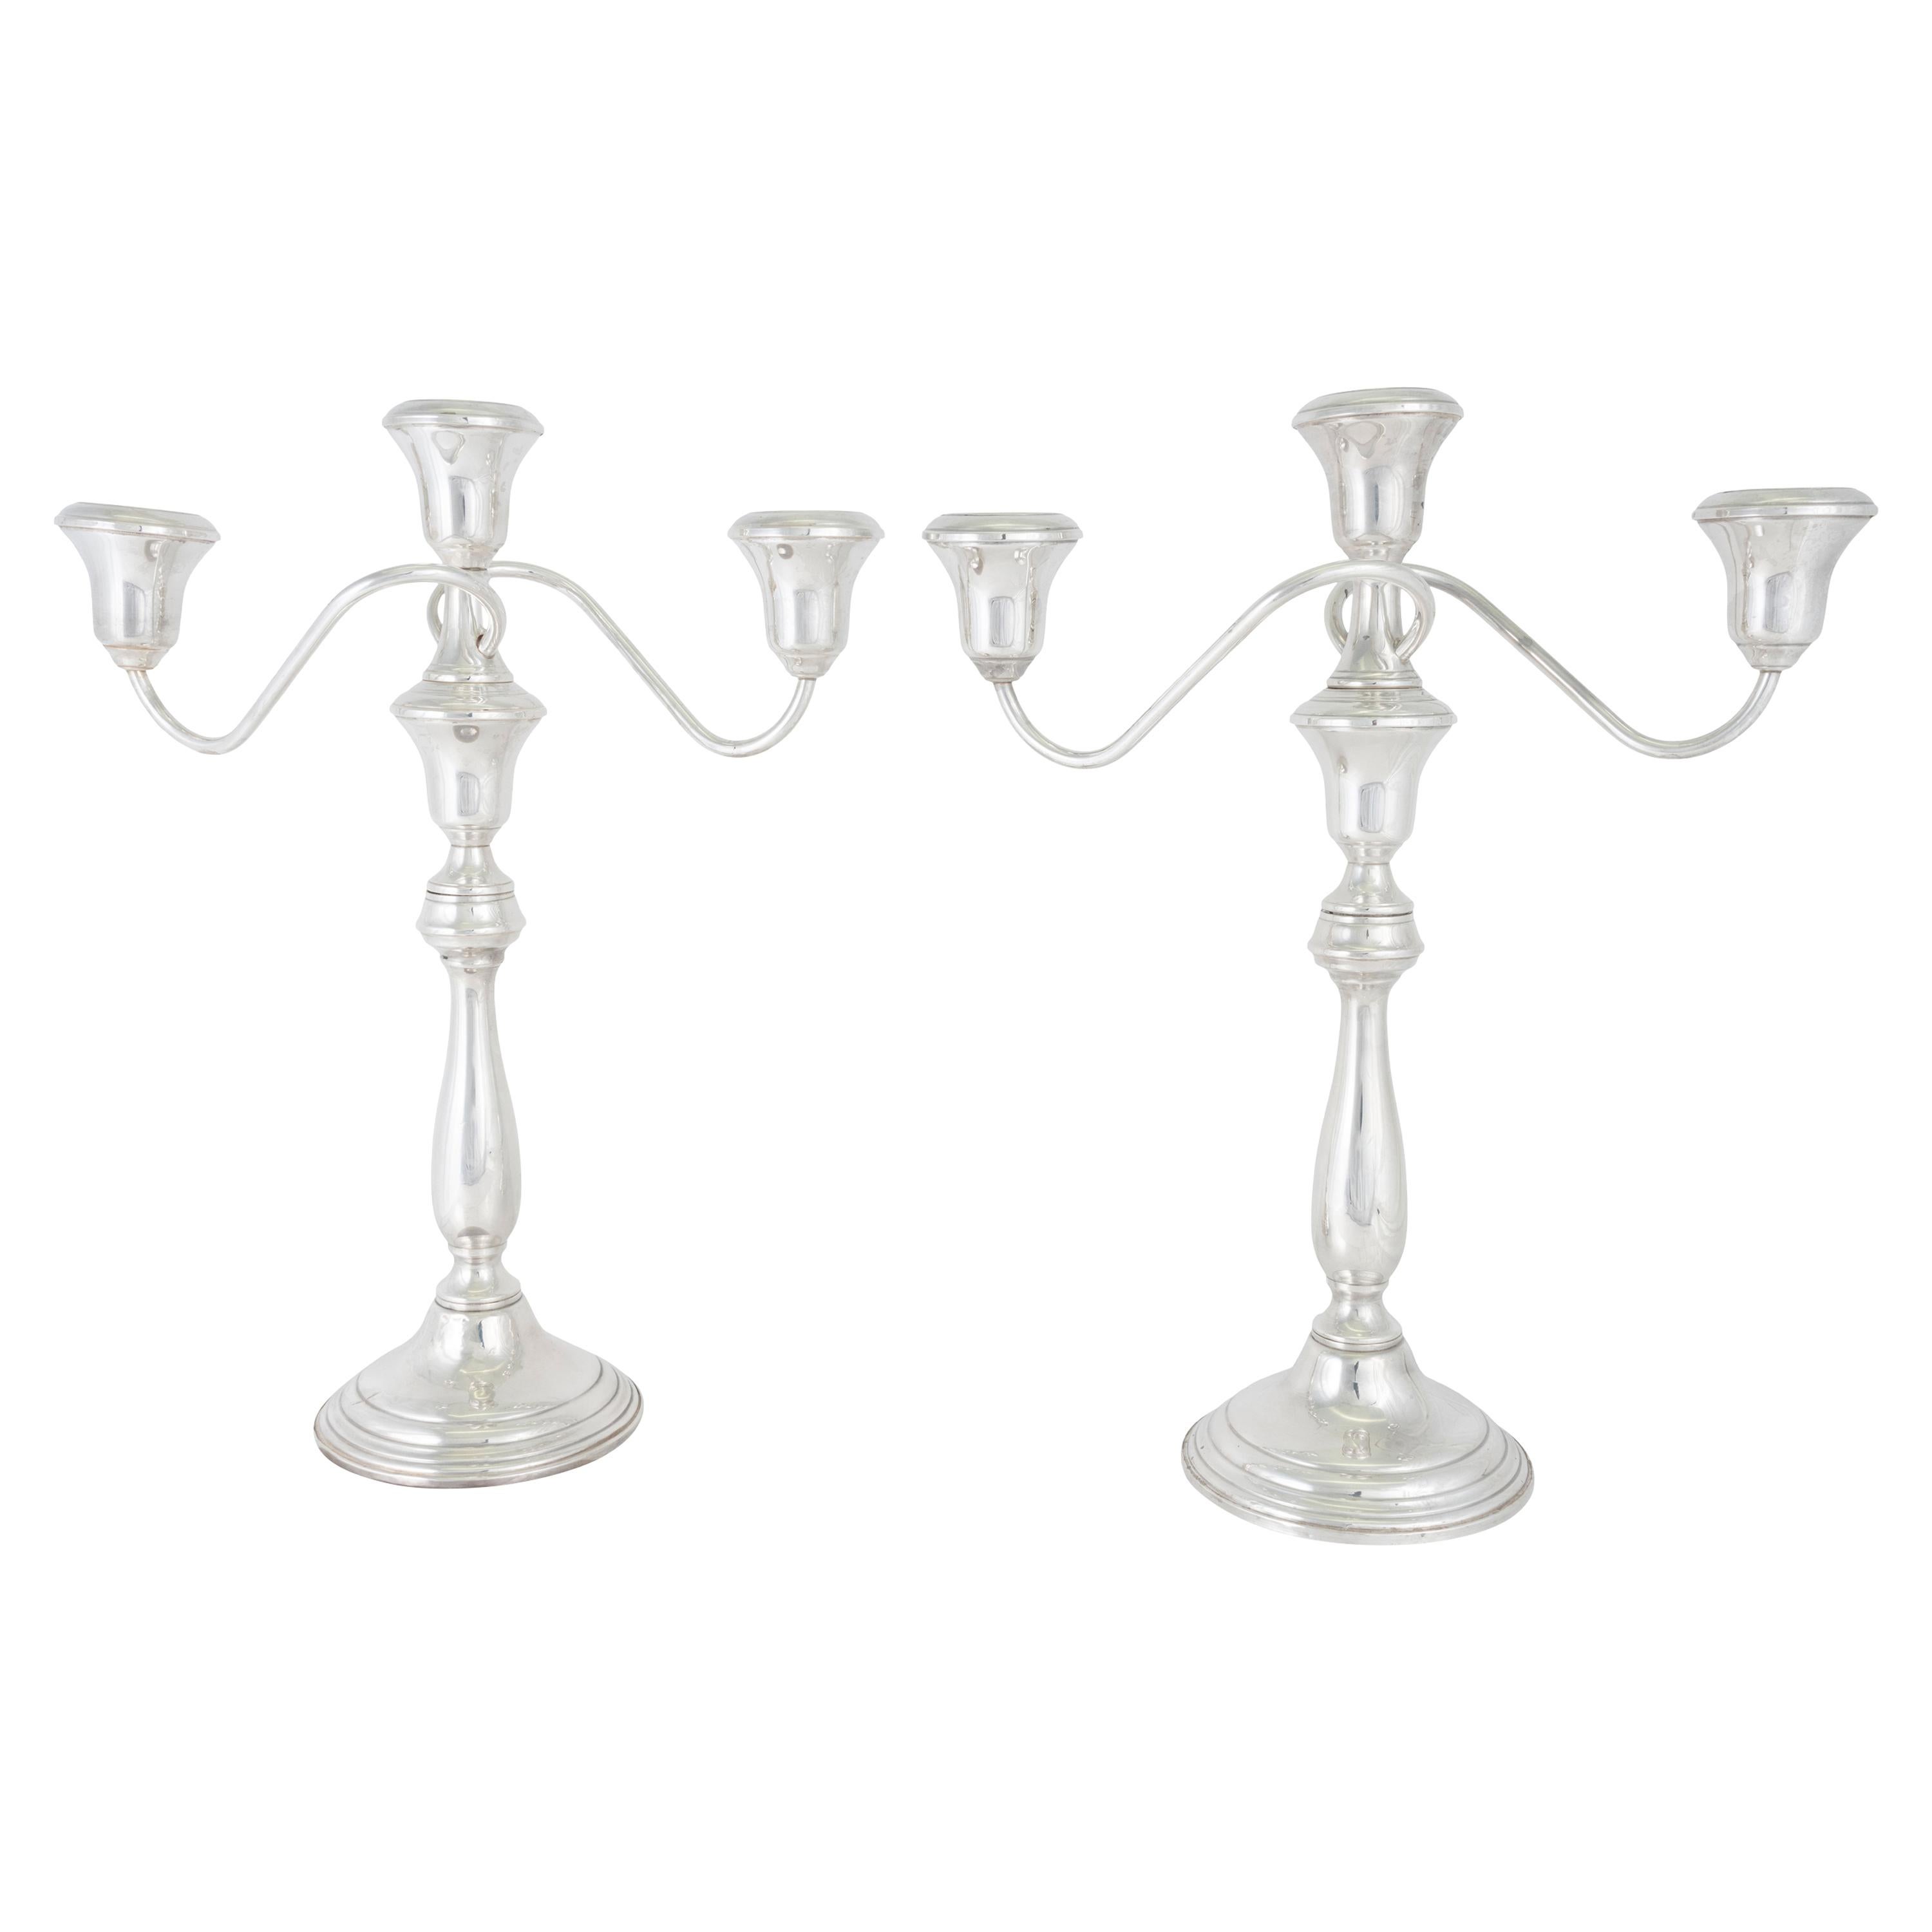 Circa 1900 Towle Sterling Candelabras For Sale